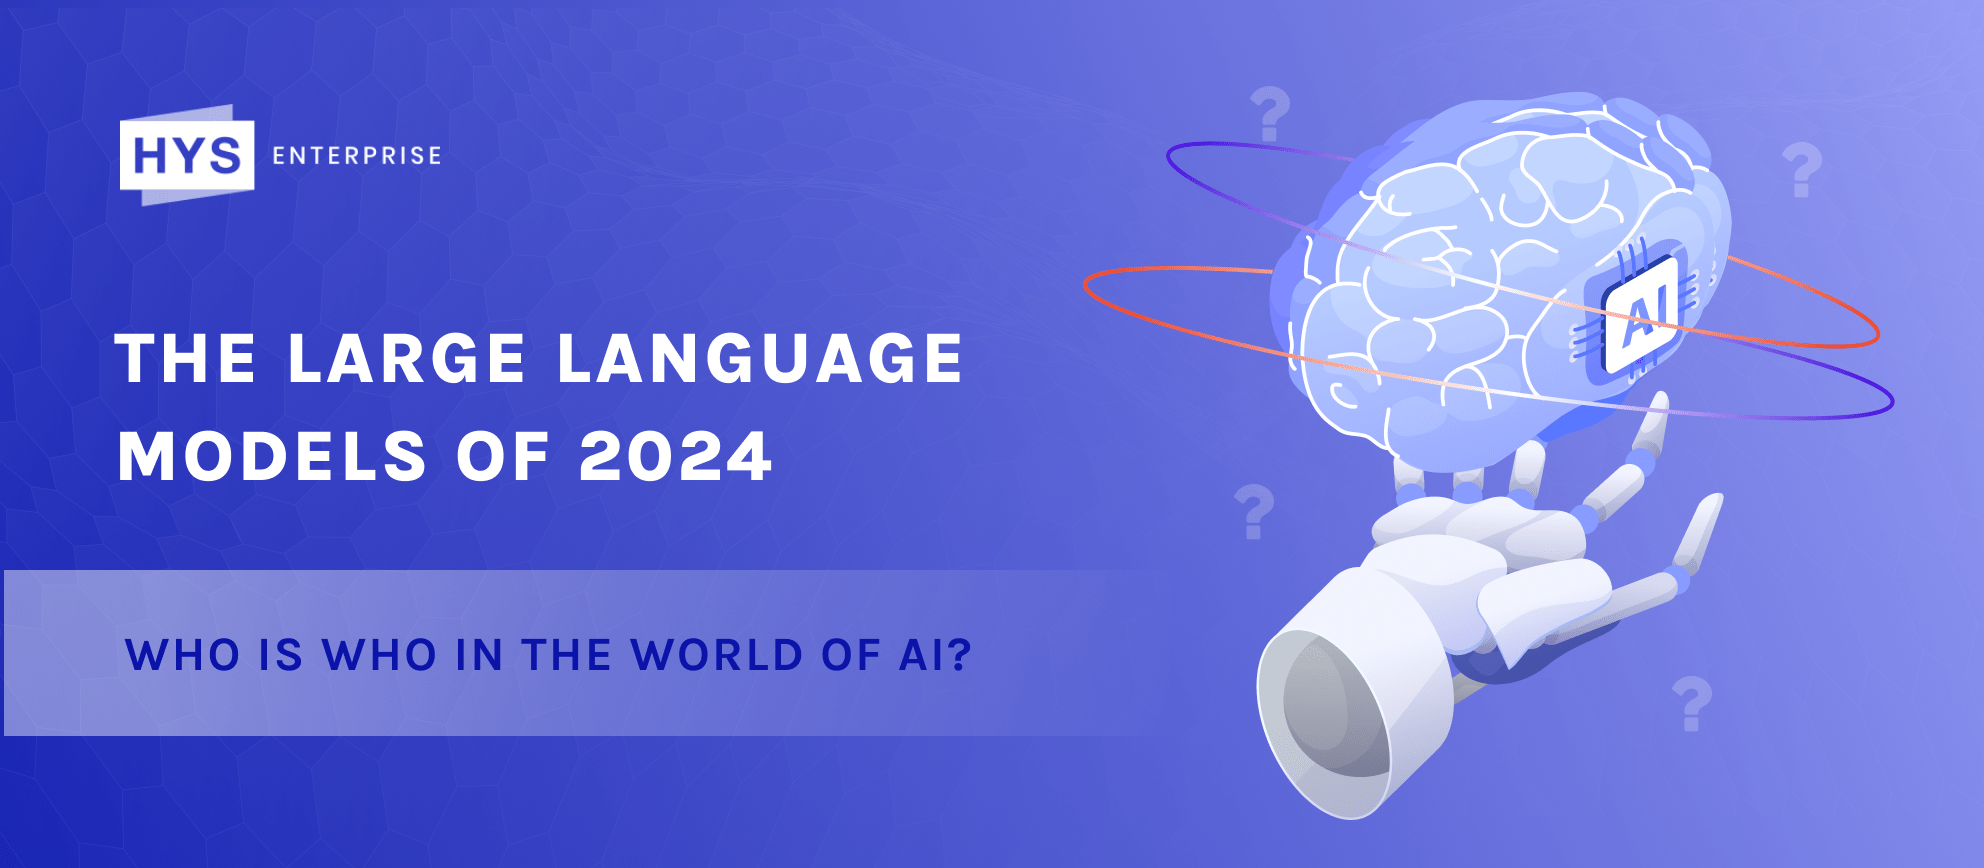 The Large Language Models of 2024: Who is Who in the World of AI?